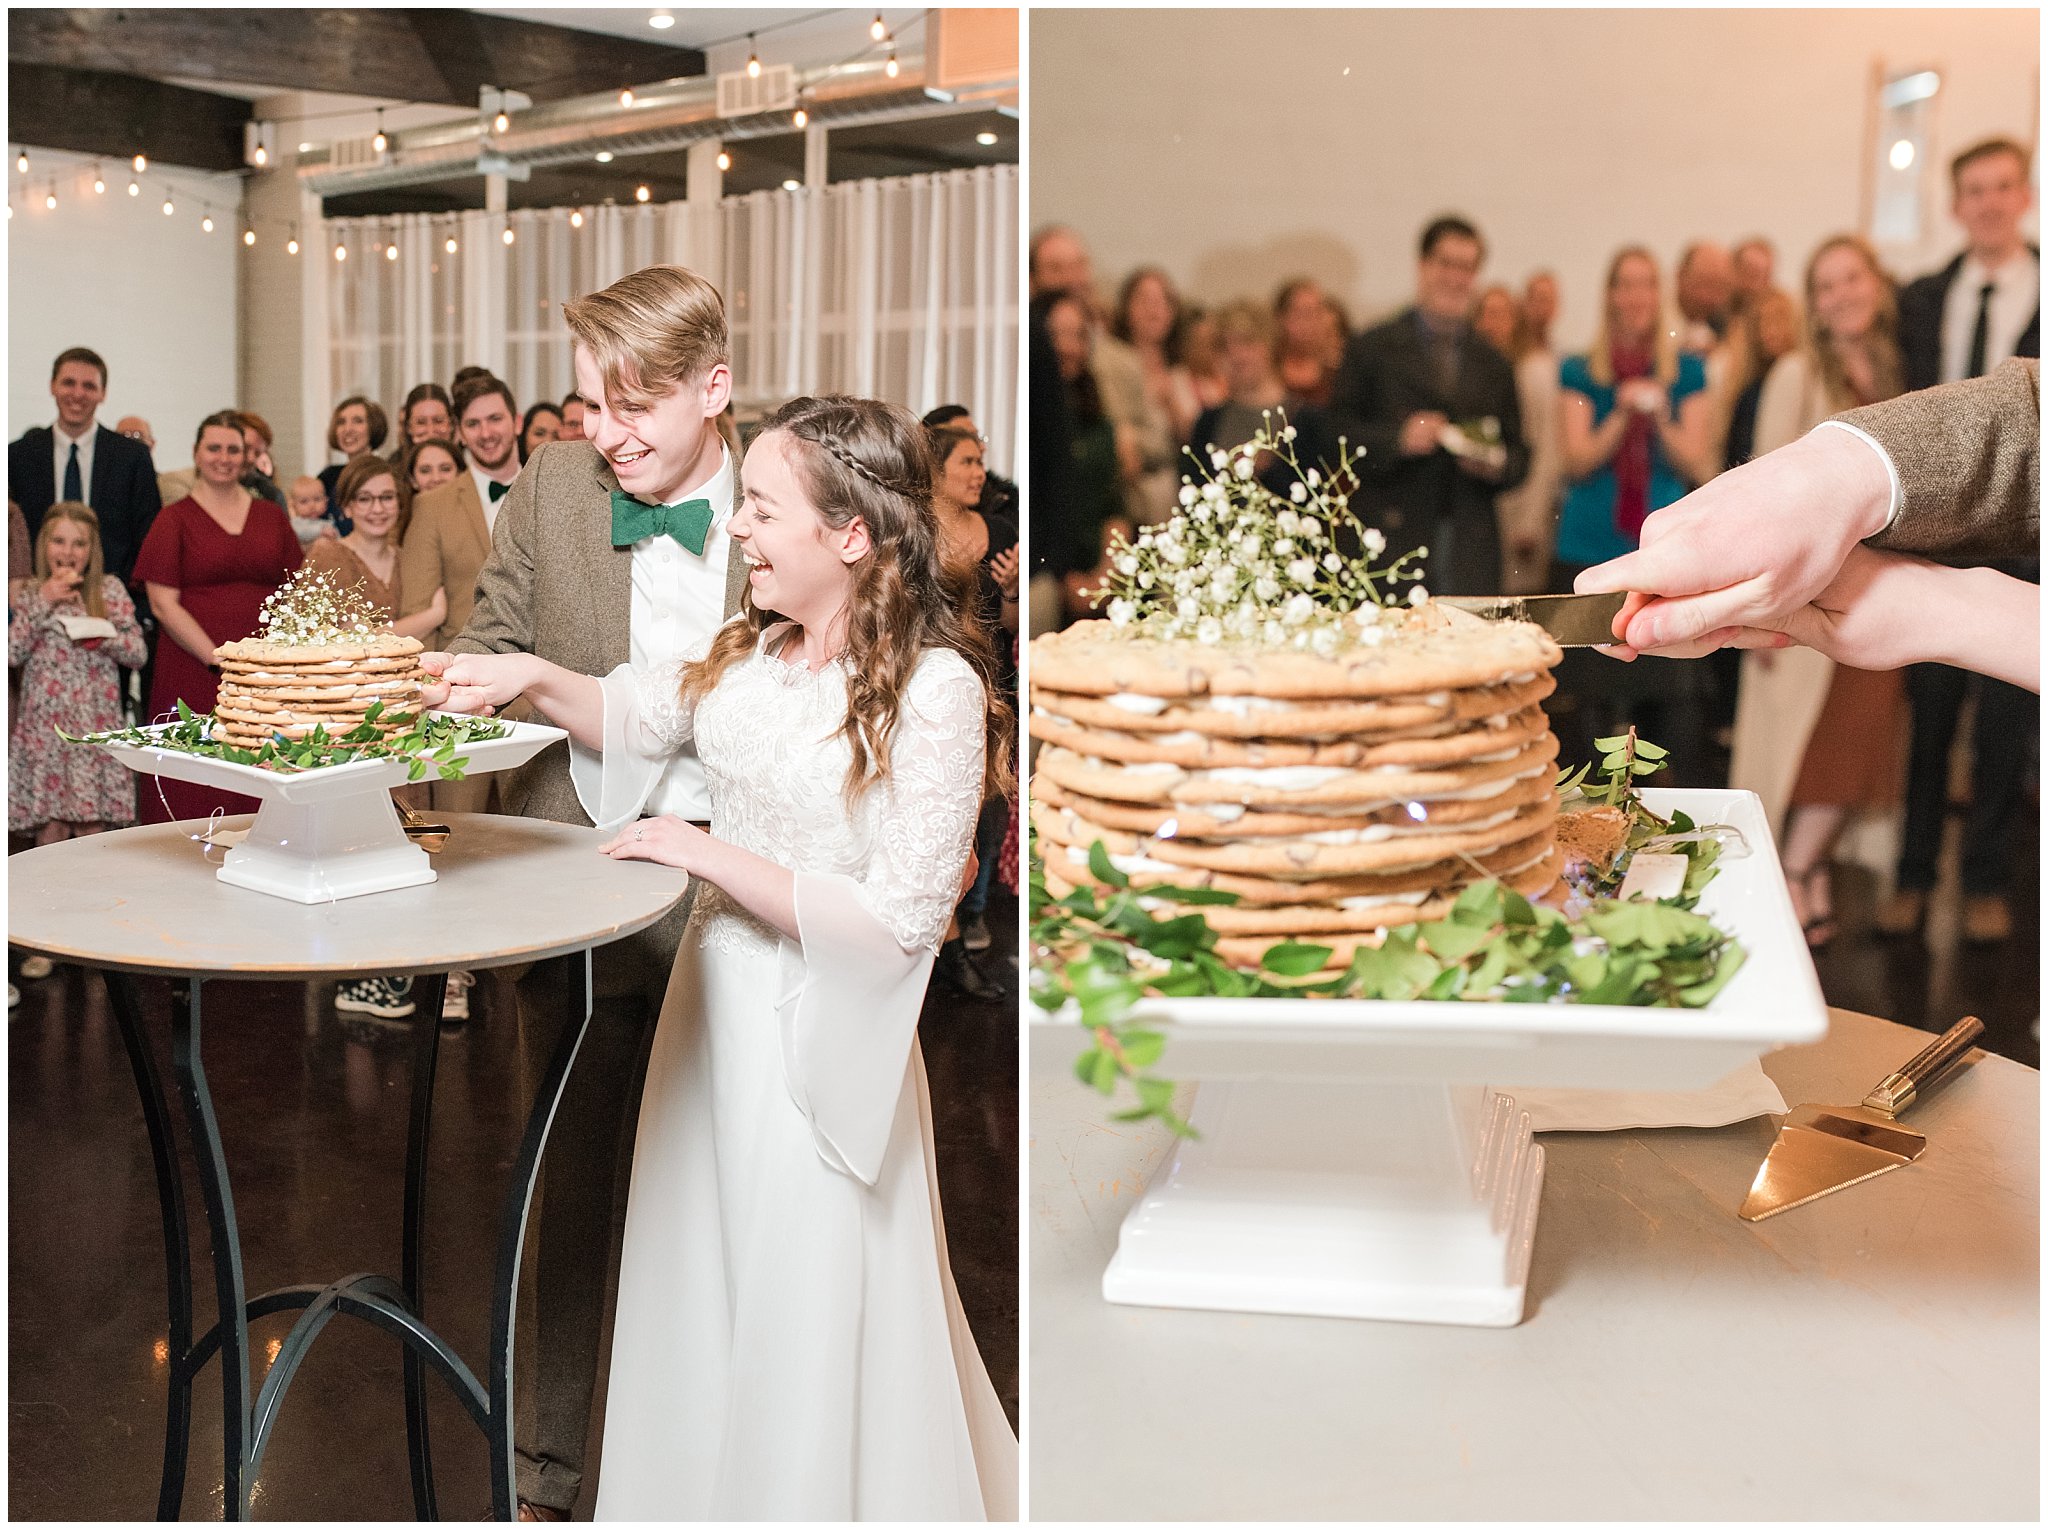 Bride and groom cutting chocolate Chip cookie cake during reception at Sweet Magnolia Venues | Brown, Emerald Green, and white wedding | Ogden Temple and Sweet Magnolia Wedding | Jessie and Dallin Photography